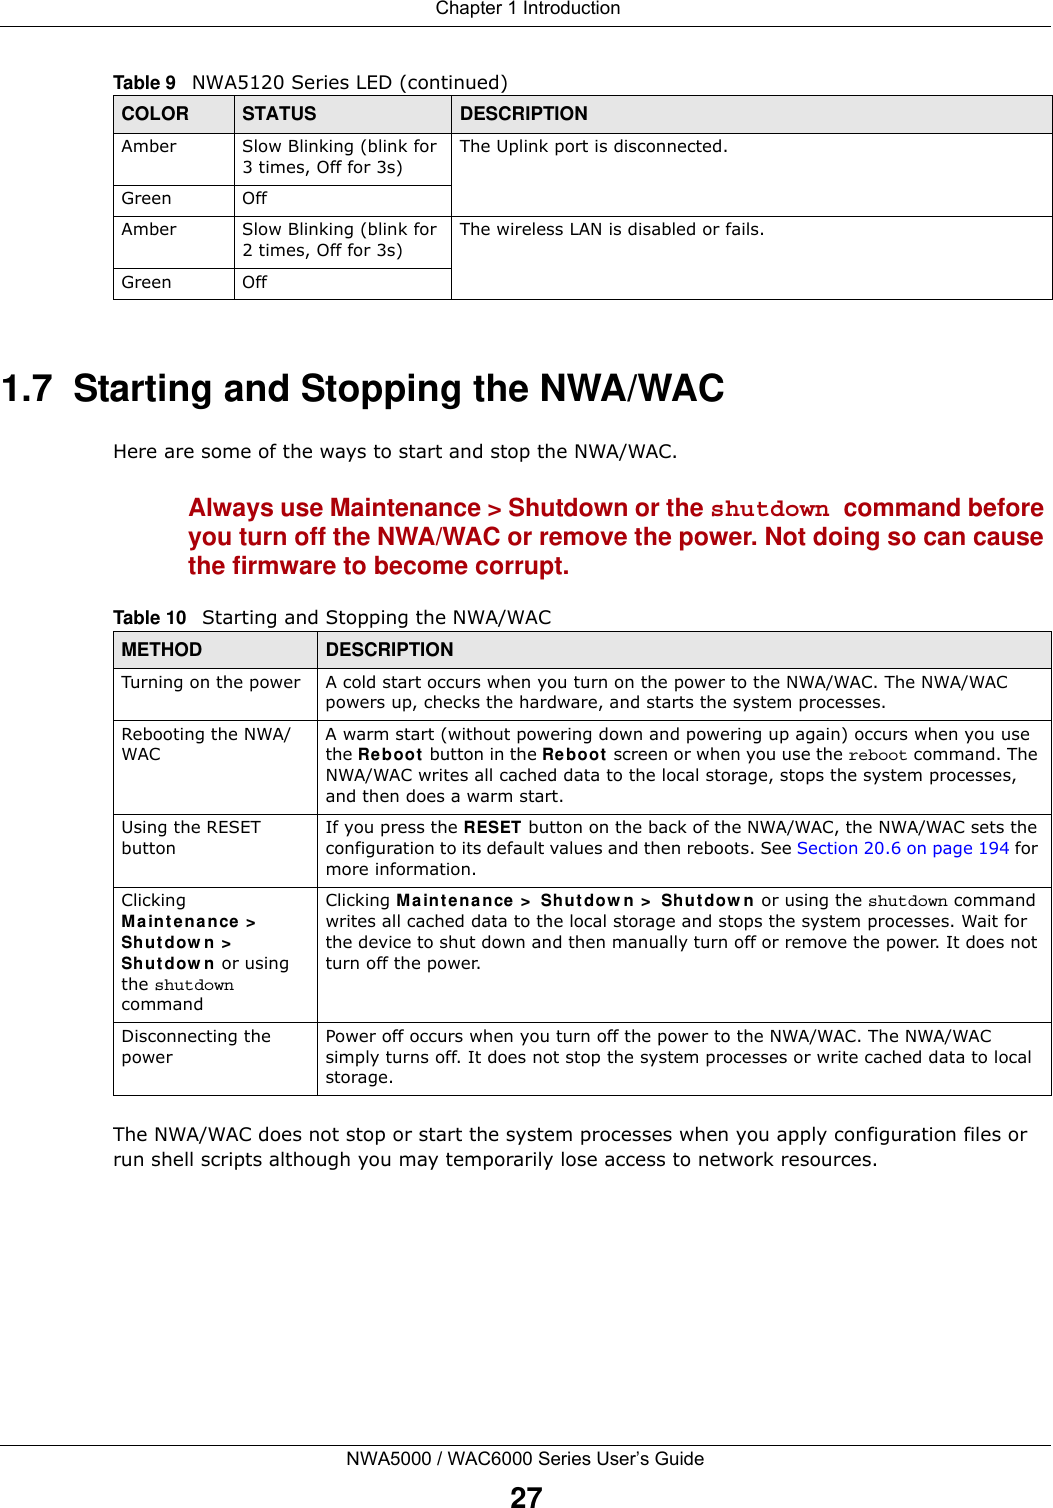  Chapter 1 IntroductionNWA5000 / WAC6000 Series User’s Guide271.7  Starting and Stopping the NWA/WACHere are some of the ways to start and stop the NWA/WAC.Always use Maintenance &gt; Shutdown or the shutdown command before you turn off the NWA/WAC or remove the power. Not doing so can cause the firmware to become corrupt. The NWA/WAC does not stop or start the system processes when you apply configuration files or run shell scripts although you may temporarily lose access to network resources.Amber Slow Blinking (blink for 3 times, Off for 3s)The Uplink port is disconnected.Green OffAmber Slow Blinking (blink for 2 times, Off for 3s)The wireless LAN is disabled or fails.Green OffTable 9   NWA5120 Series LED (continued)COLOR STATUS DESCRIPTIONTable 10   Starting and Stopping the NWA/WACMETHOD DESCRIPTIONTurning on the power A cold start occurs when you turn on the power to the NWA/WAC. The NWA/WAC powers up, checks the hardware, and starts the system processes.Rebooting the NWA/WACA warm start (without powering down and powering up again) occurs when you use the Reboot  button in the Re bo ot  screen or when you use the reboot command. The NWA/WAC writes all cached data to the local storage, stops the system processes, and then does a warm start. Using the RESET buttonIf you press the RESET button on the back of the NWA/WAC, the NWA/WAC sets the configuration to its default values and then reboots. See Section 20.6 on page 194 for more information.Clicking Main t enance &gt;  Shutdow n &gt;  Sh ut do w n  or using the shutdown commandClicking M a intenance  &gt;  Shut dow n  &gt;  Shutdow n or using the shutdown command writes all cached data to the local storage and stops the system processes. Wait for the device to shut down and then manually turn off or remove the power. It does not turn off the power. Disconnecting the powerPower off occurs when you turn off the power to the NWA/WAC. The NWA/WAC simply turns off. It does not stop the system processes or write cached data to local storage. 